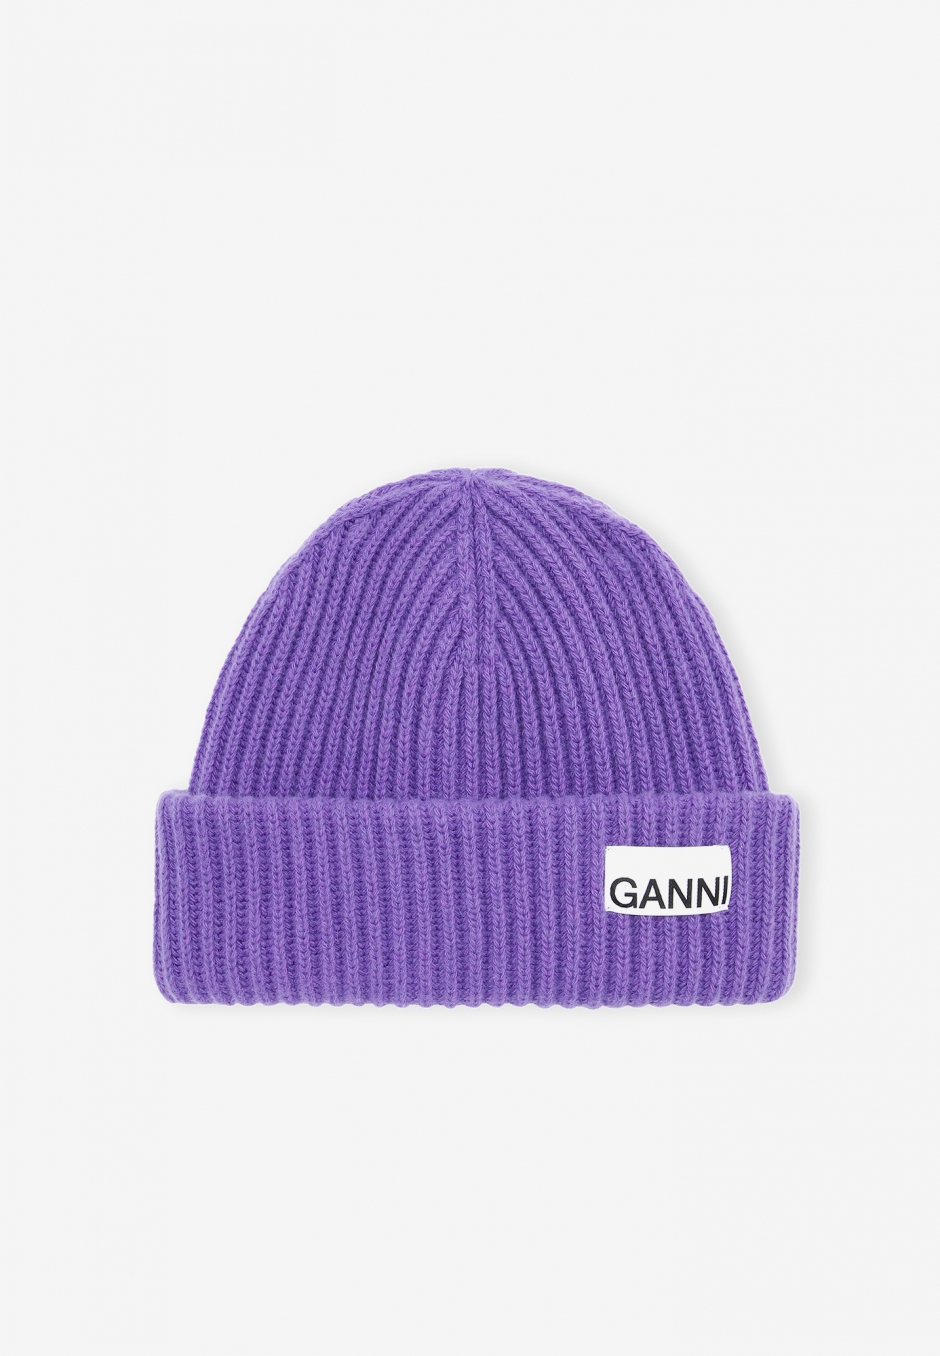 Ganni Recycled Wool Beanie Persian Violet